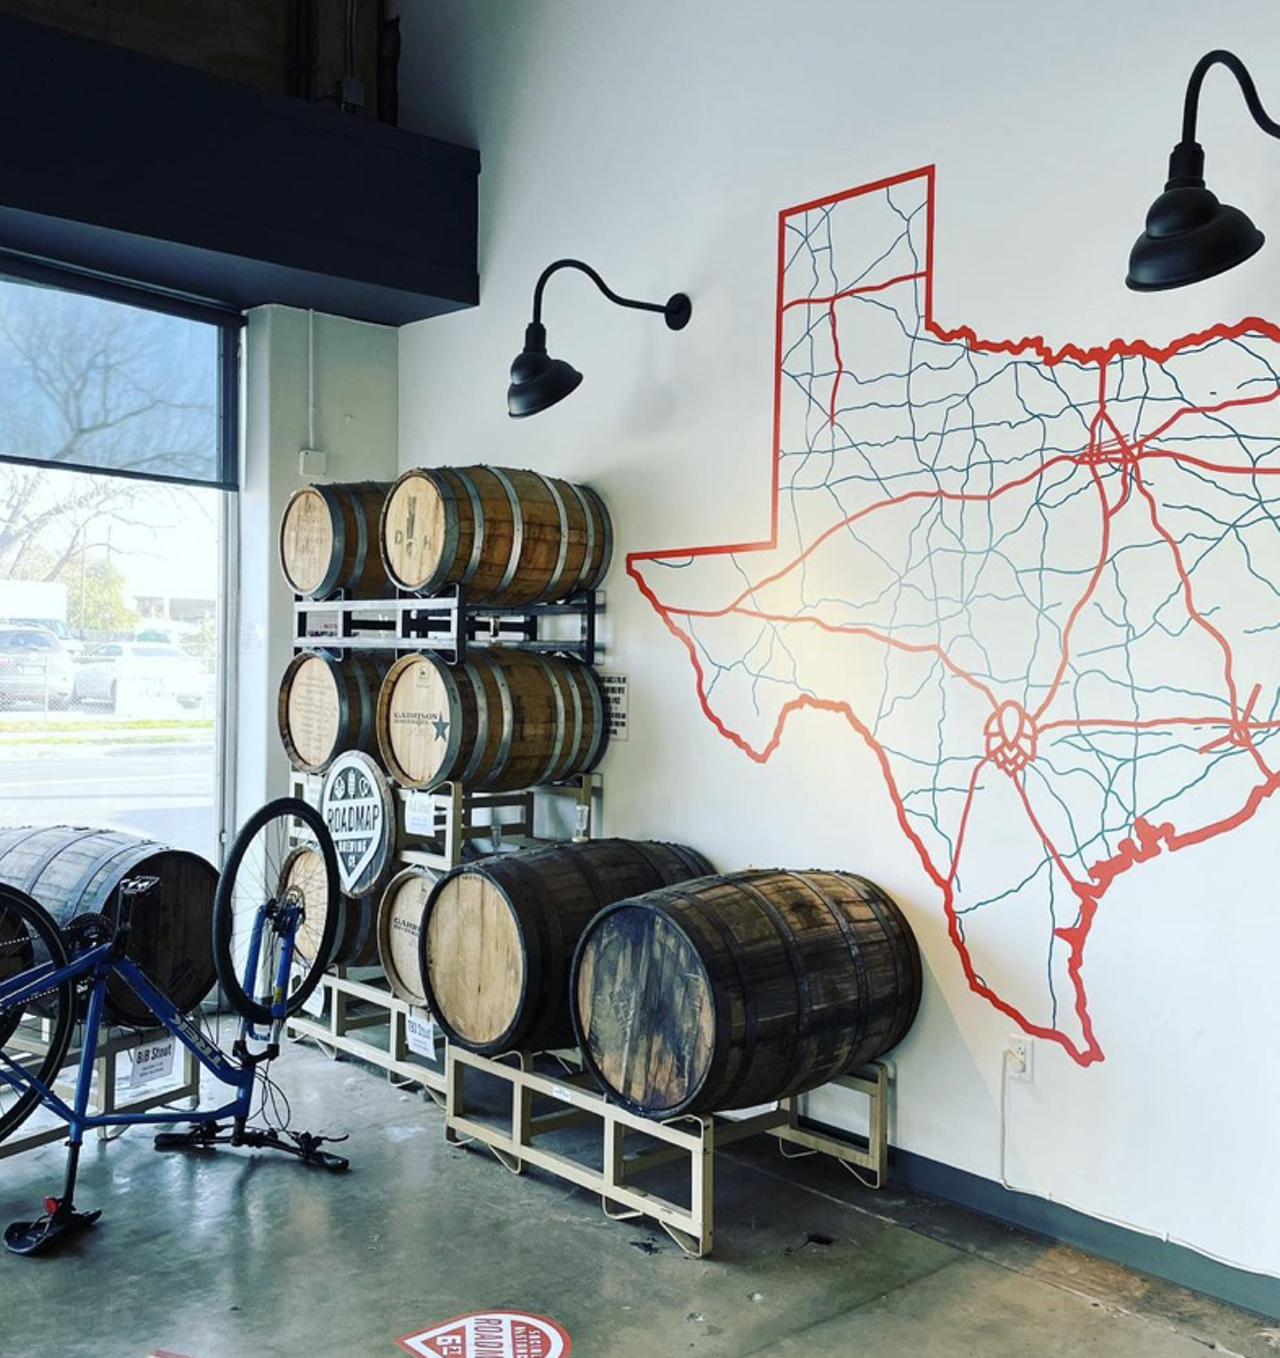 Roadmap Brewing Co.
723 N. Alamo St., (210) 254-9962, roadmapbrewing.com
Roadmap Brewing offers 13 brews on tap, as well as patio space for imbibing before you bike to your next spot.   
Photo via Instagram / rtr.ragman